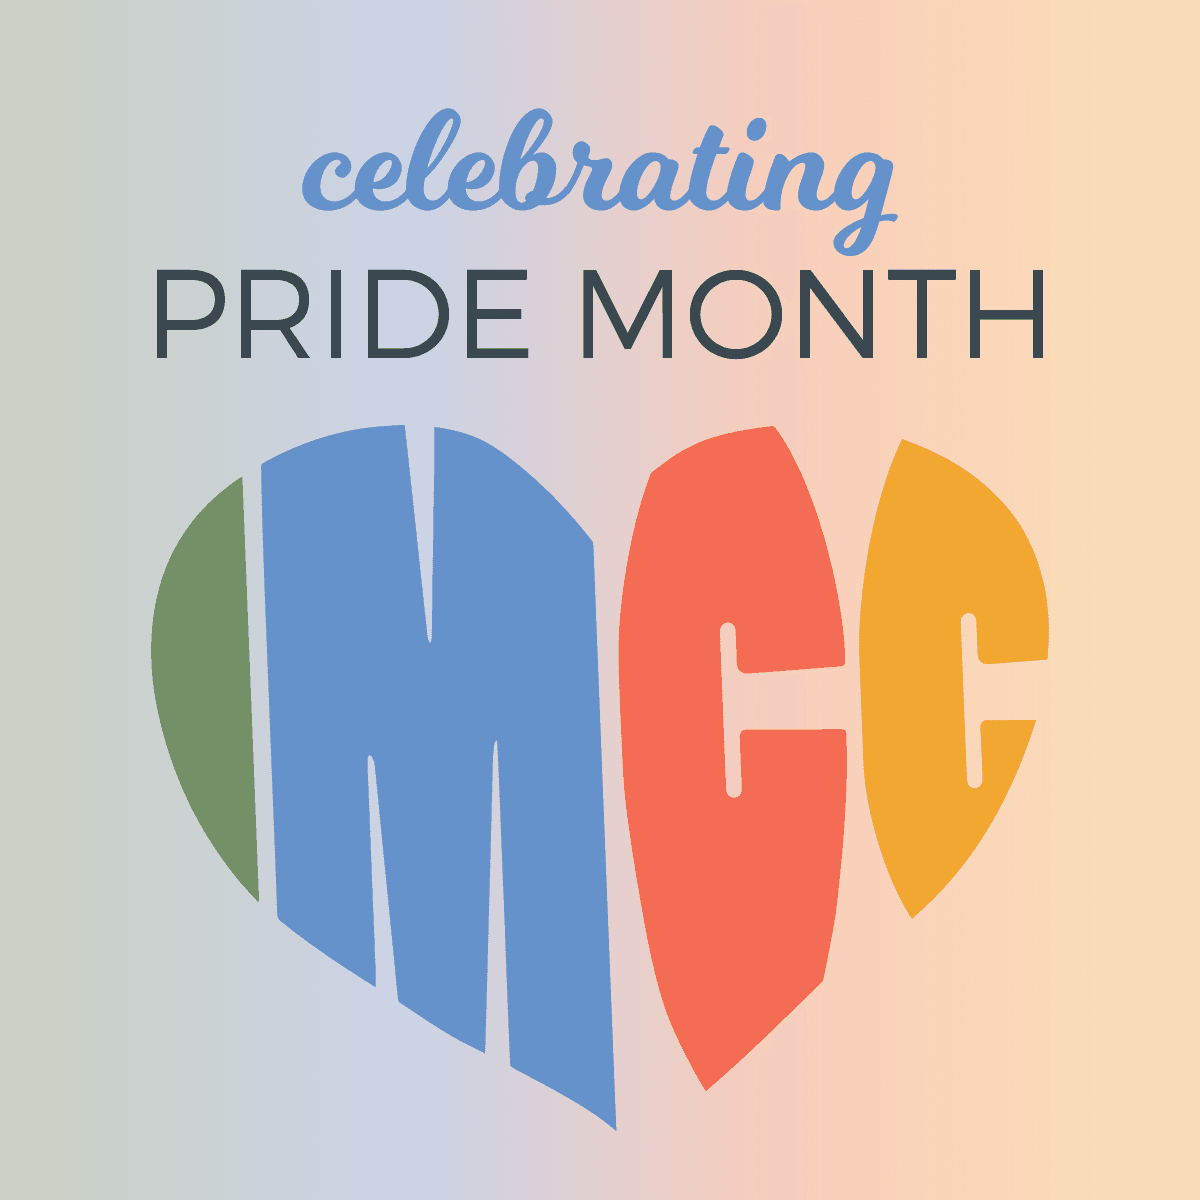 Celebrating Pride Month: Support and Resources for the LGBTQ Community